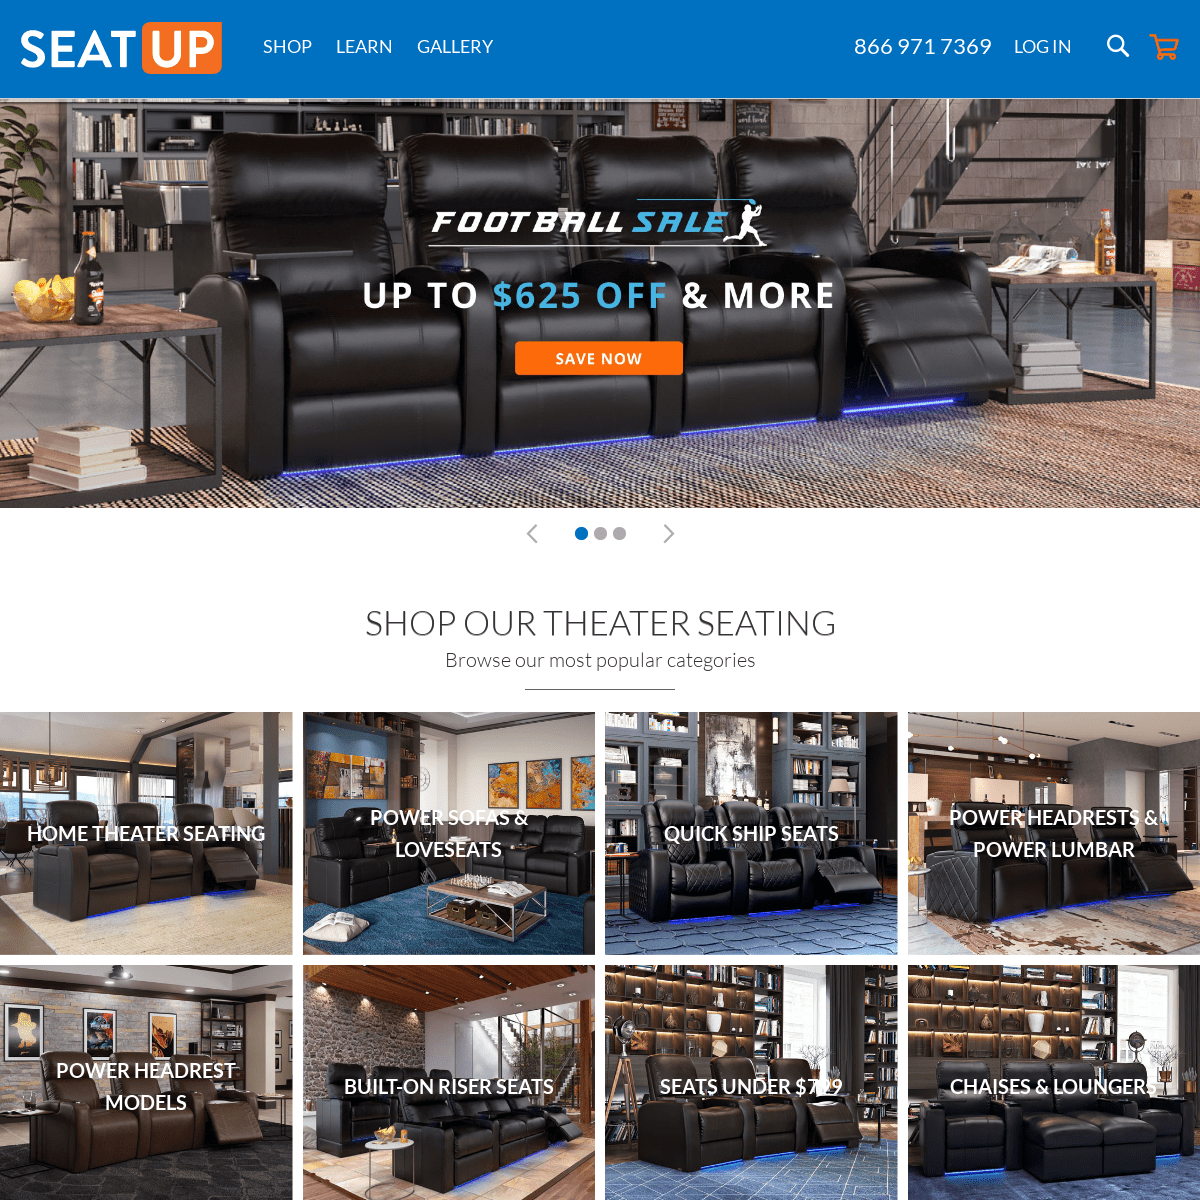 A complete backup of seatup.com